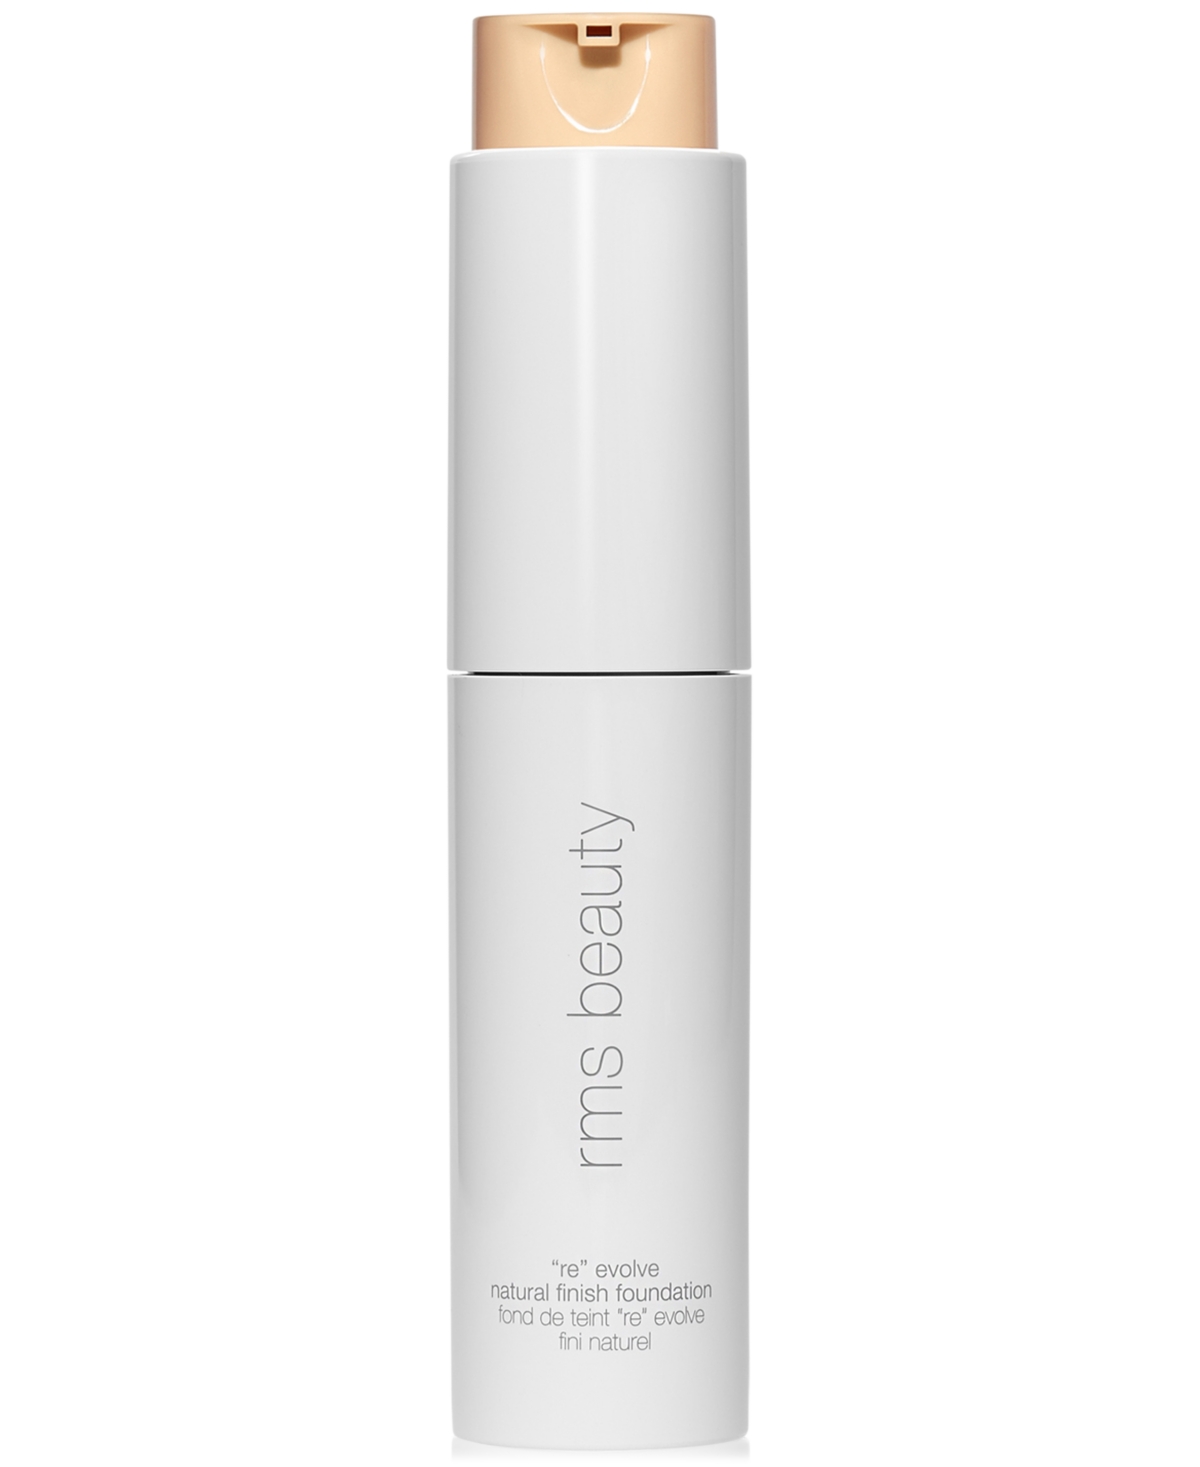 Rms Beauty Reevolve Natural Finish Foundation In A Light Shade For Fair Skin